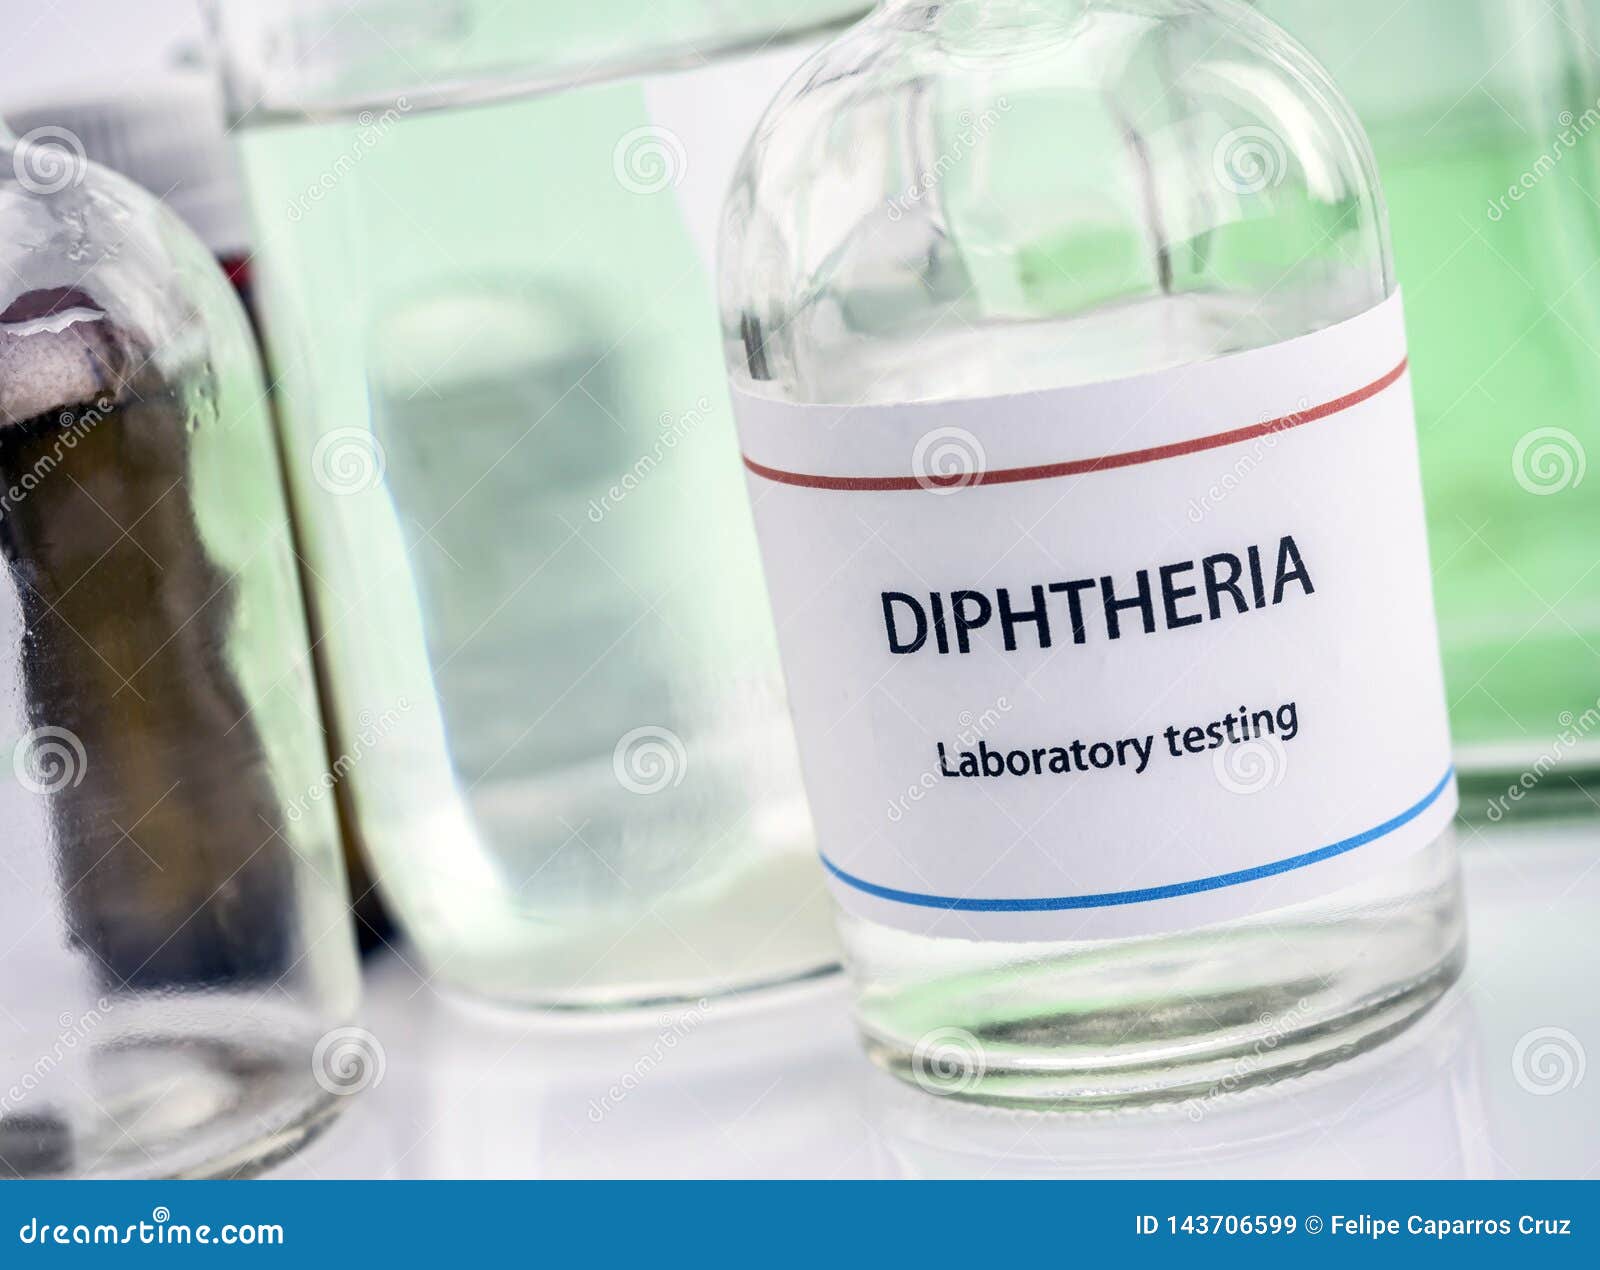 test diphtheria in laboratory, conceptual image